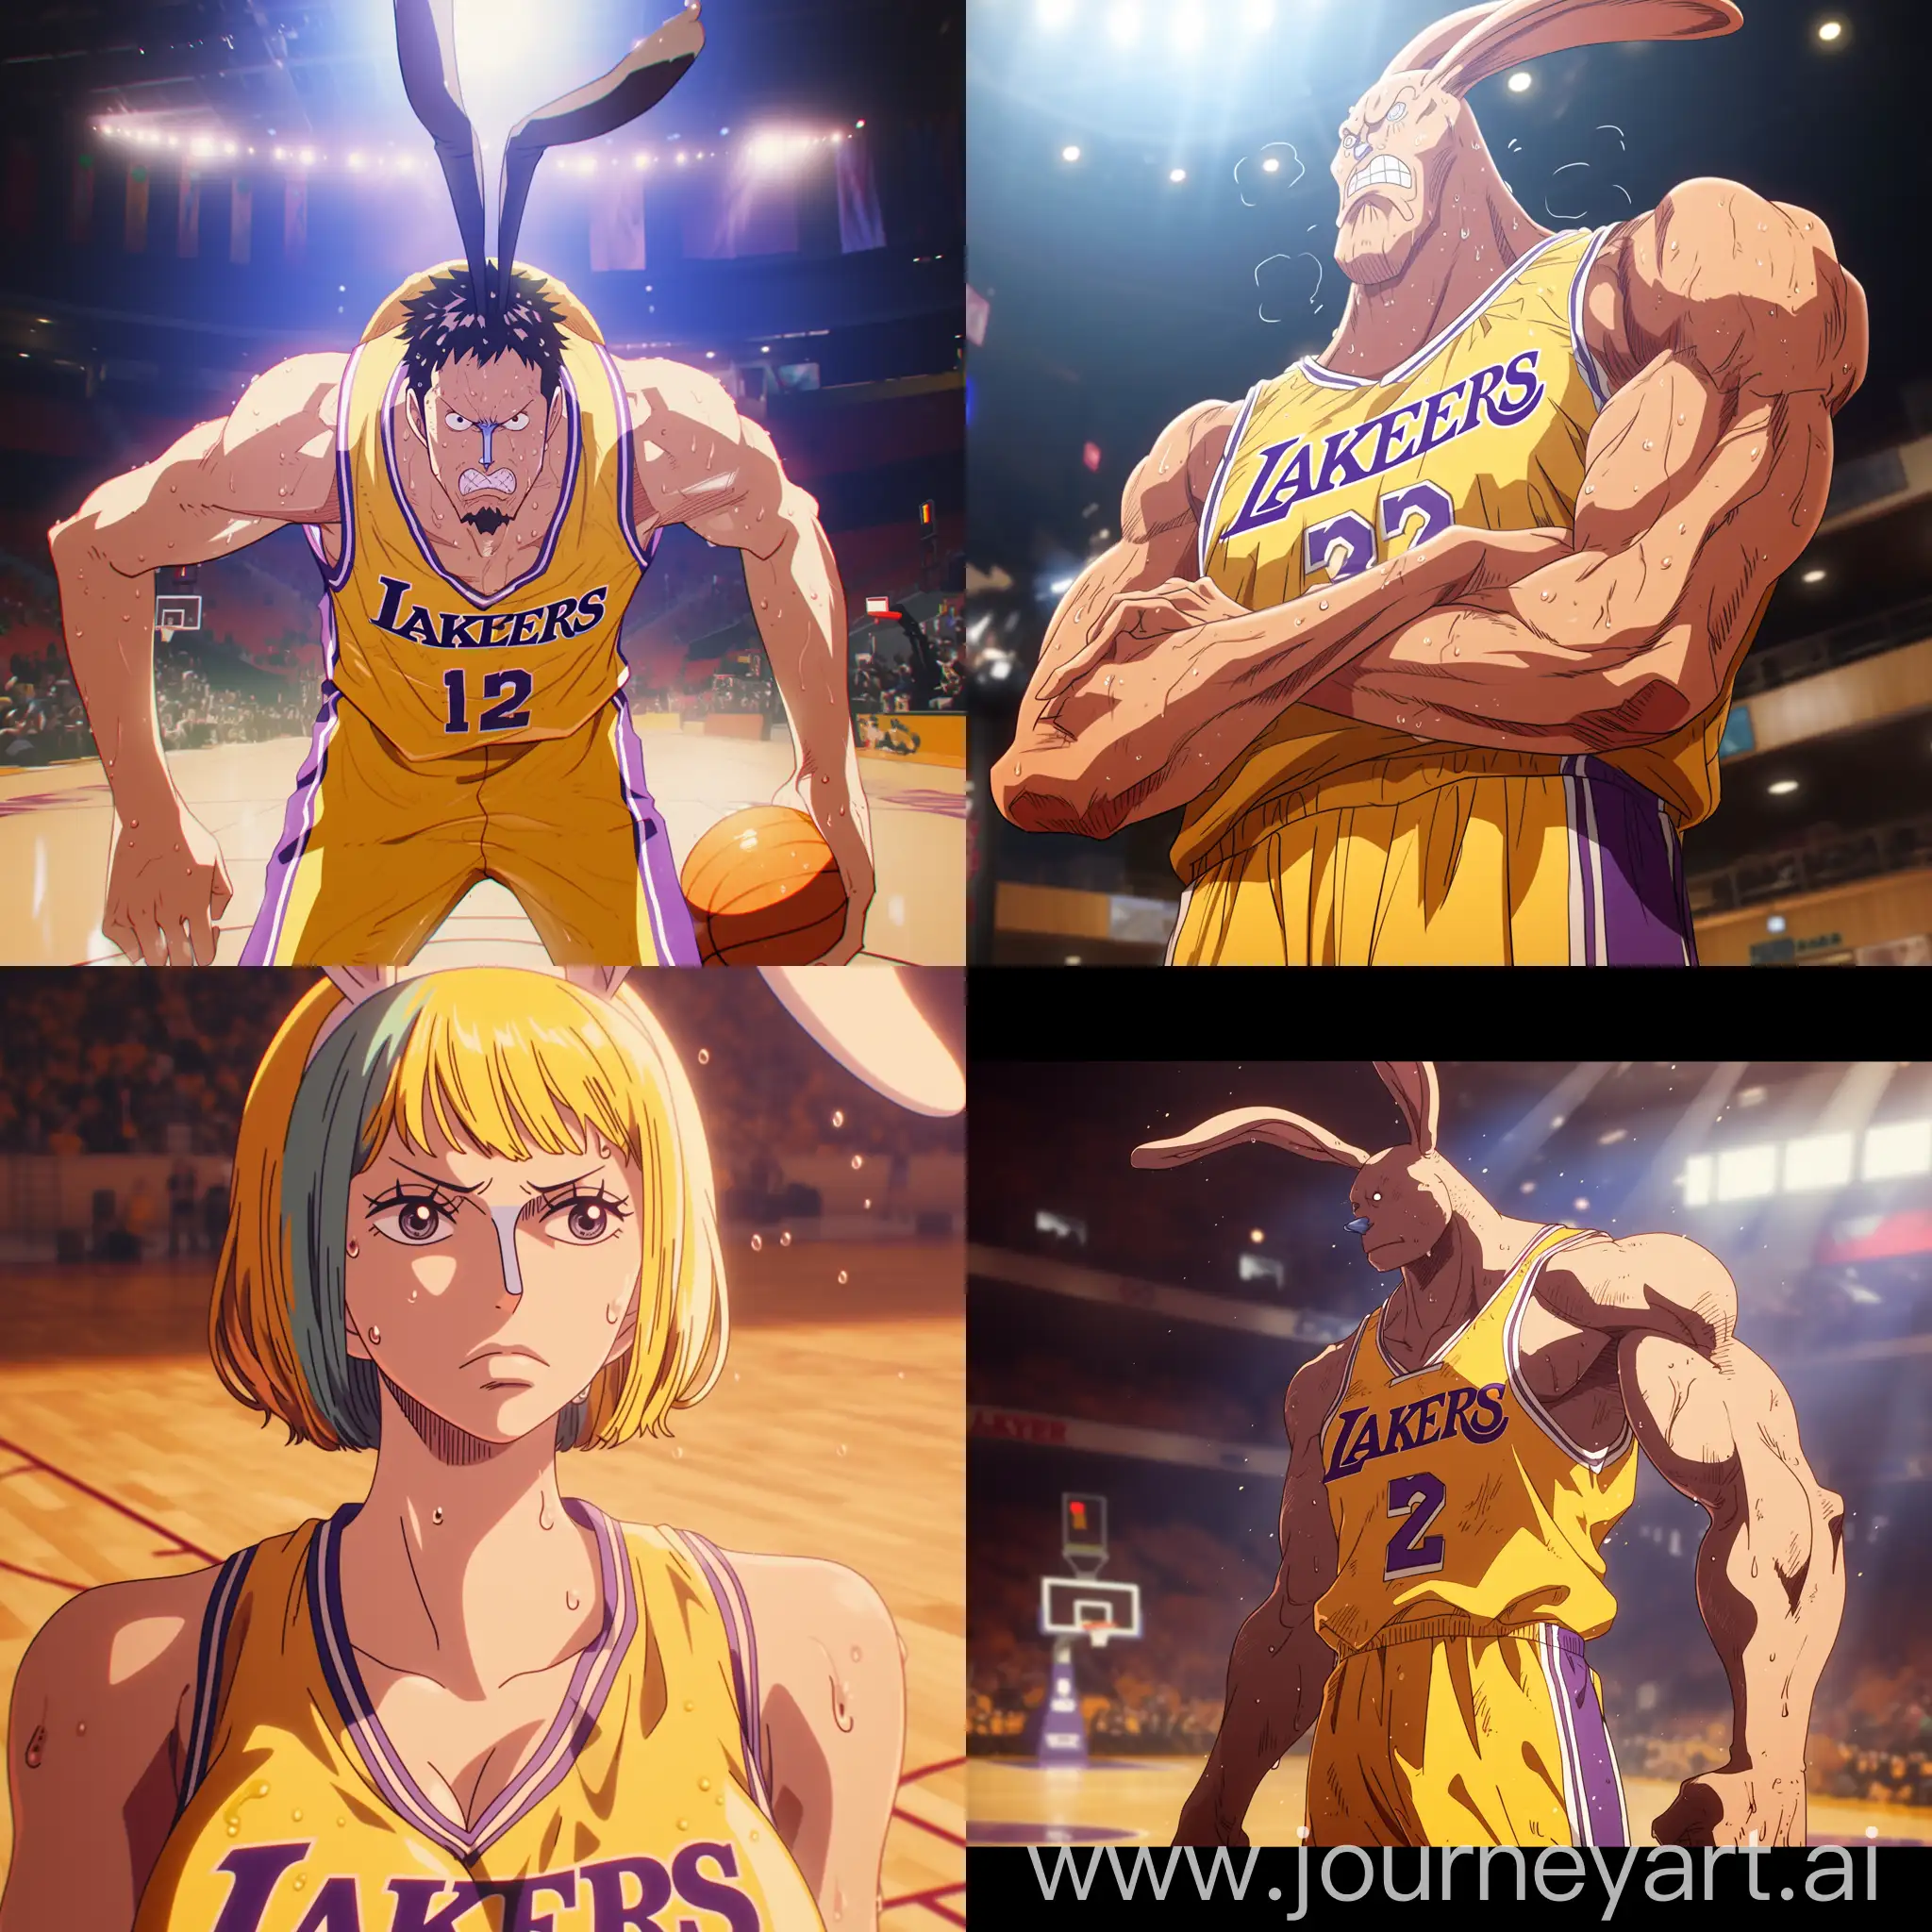 Anime-Character-Playing-Basketball-in-Lakers-Uniform